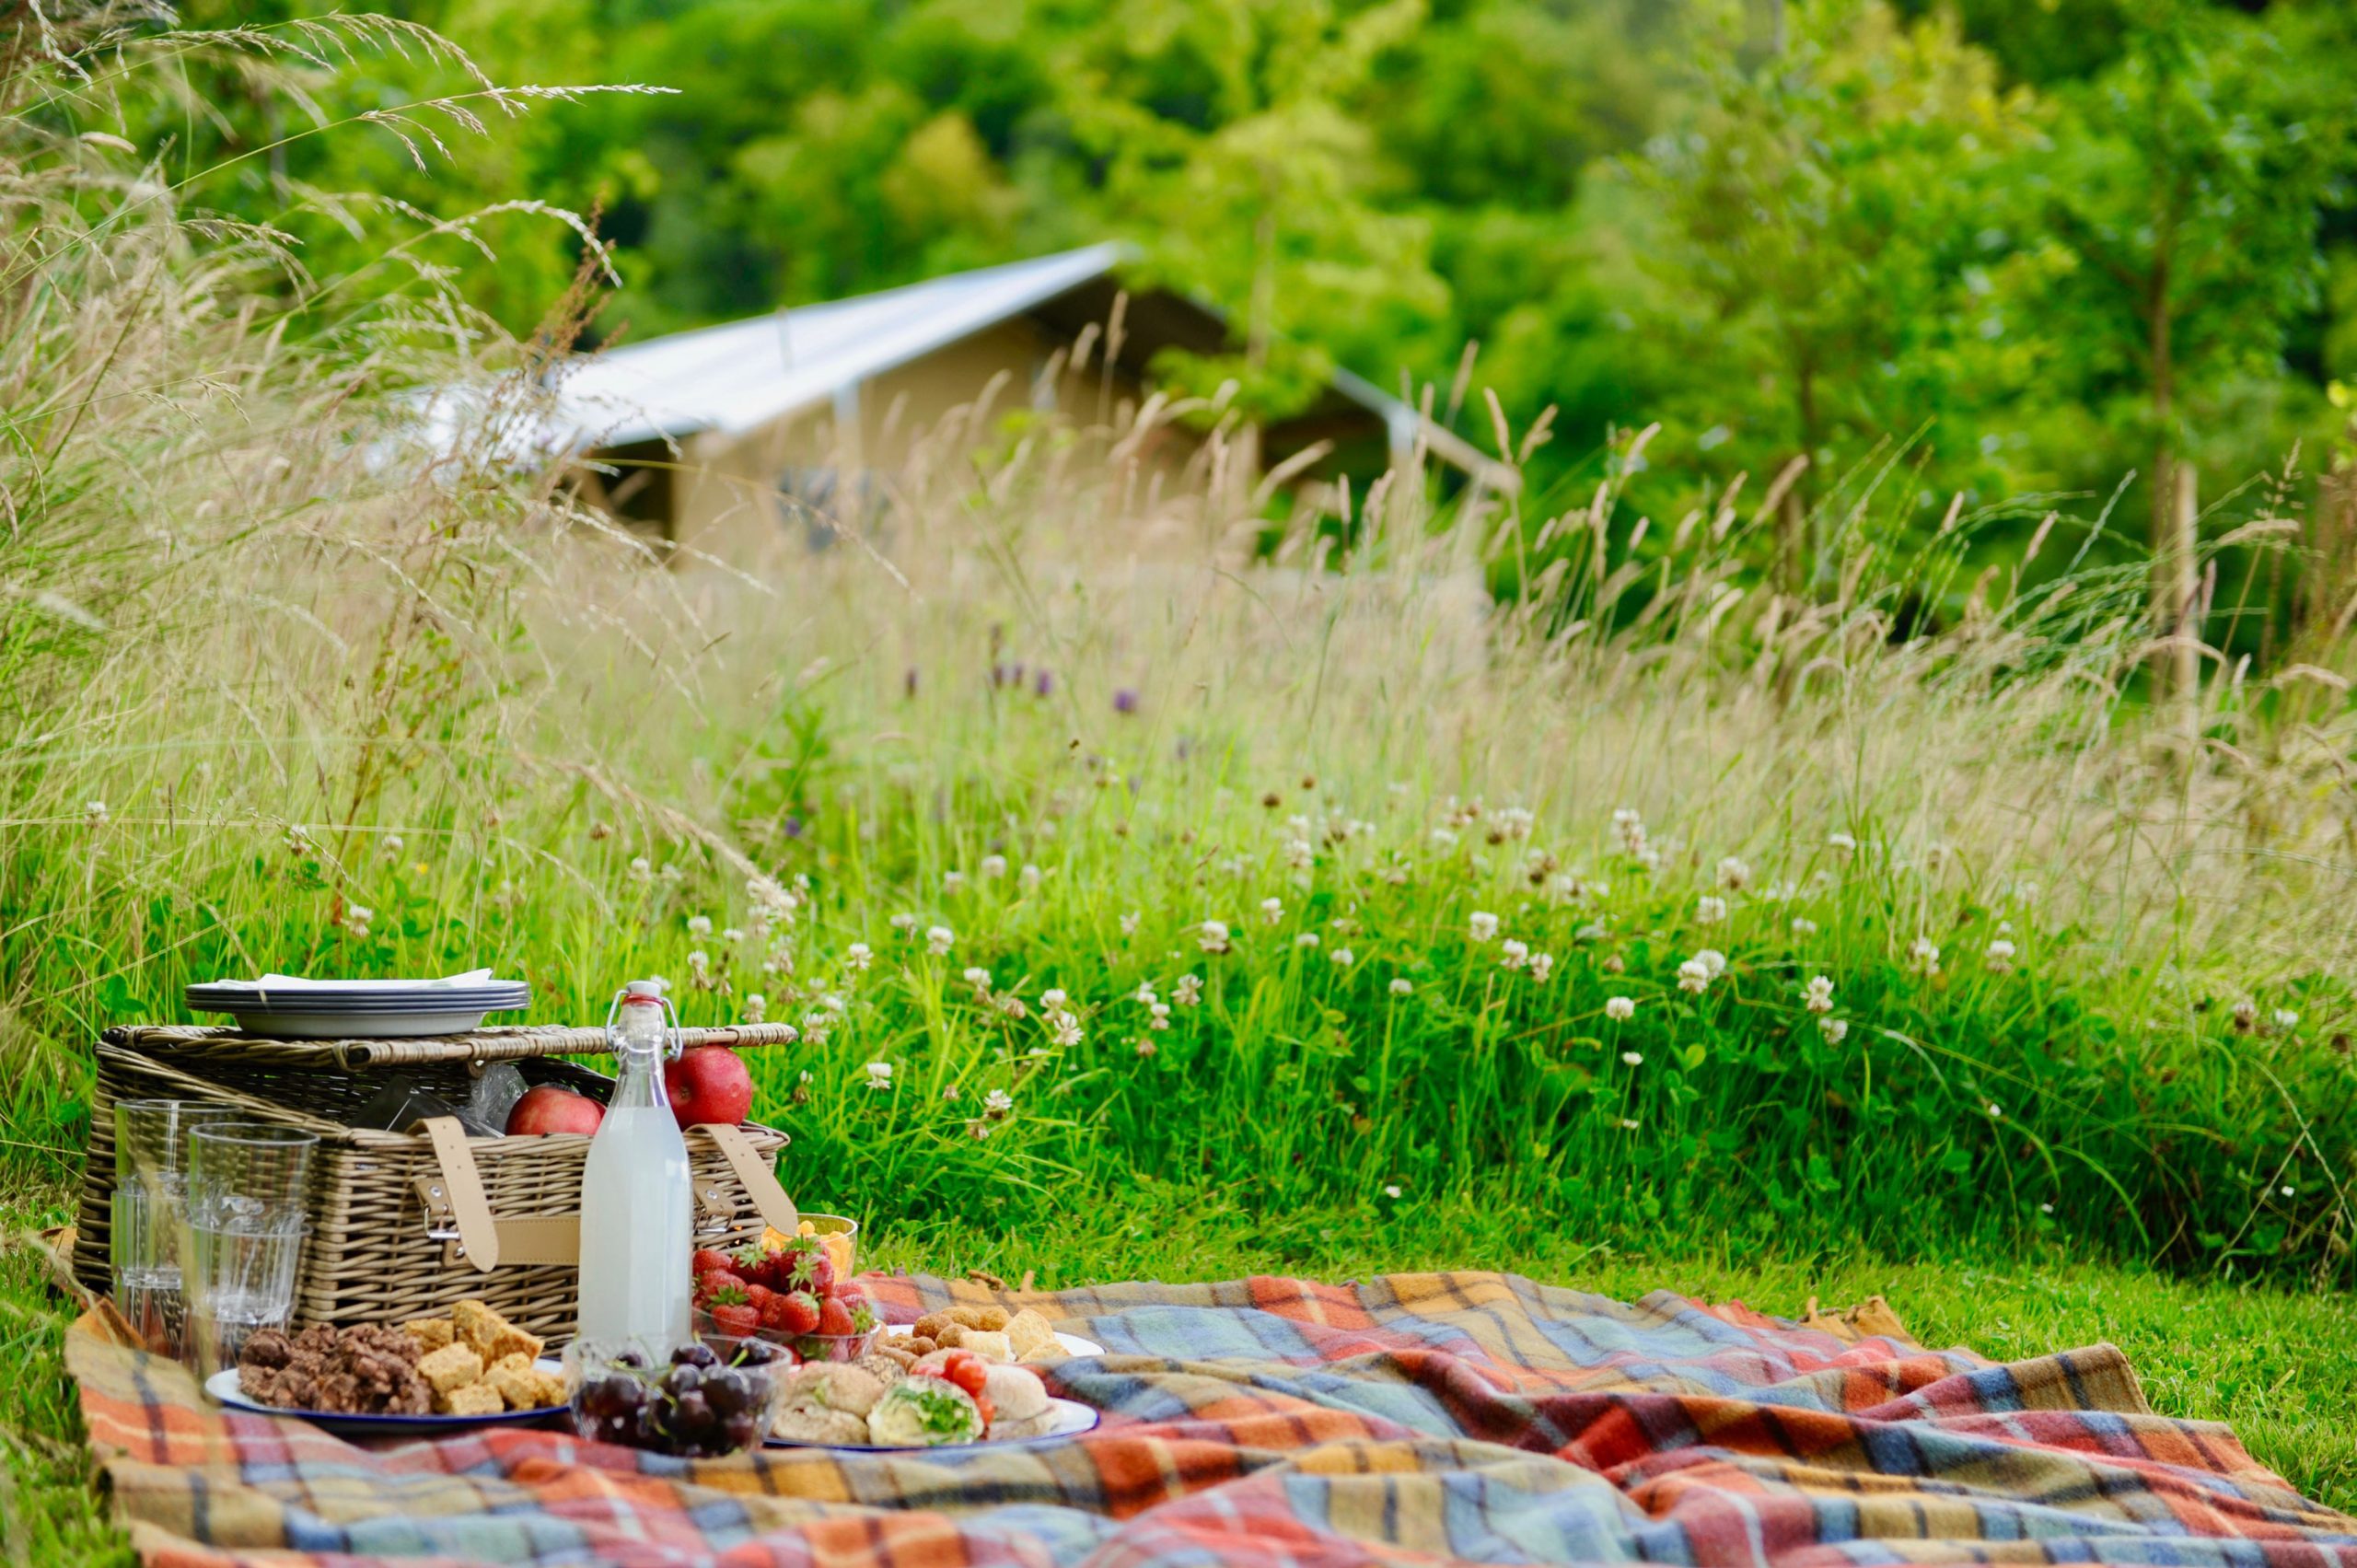 Picnic blanket and hamper laid out in field with glamping lodge in background